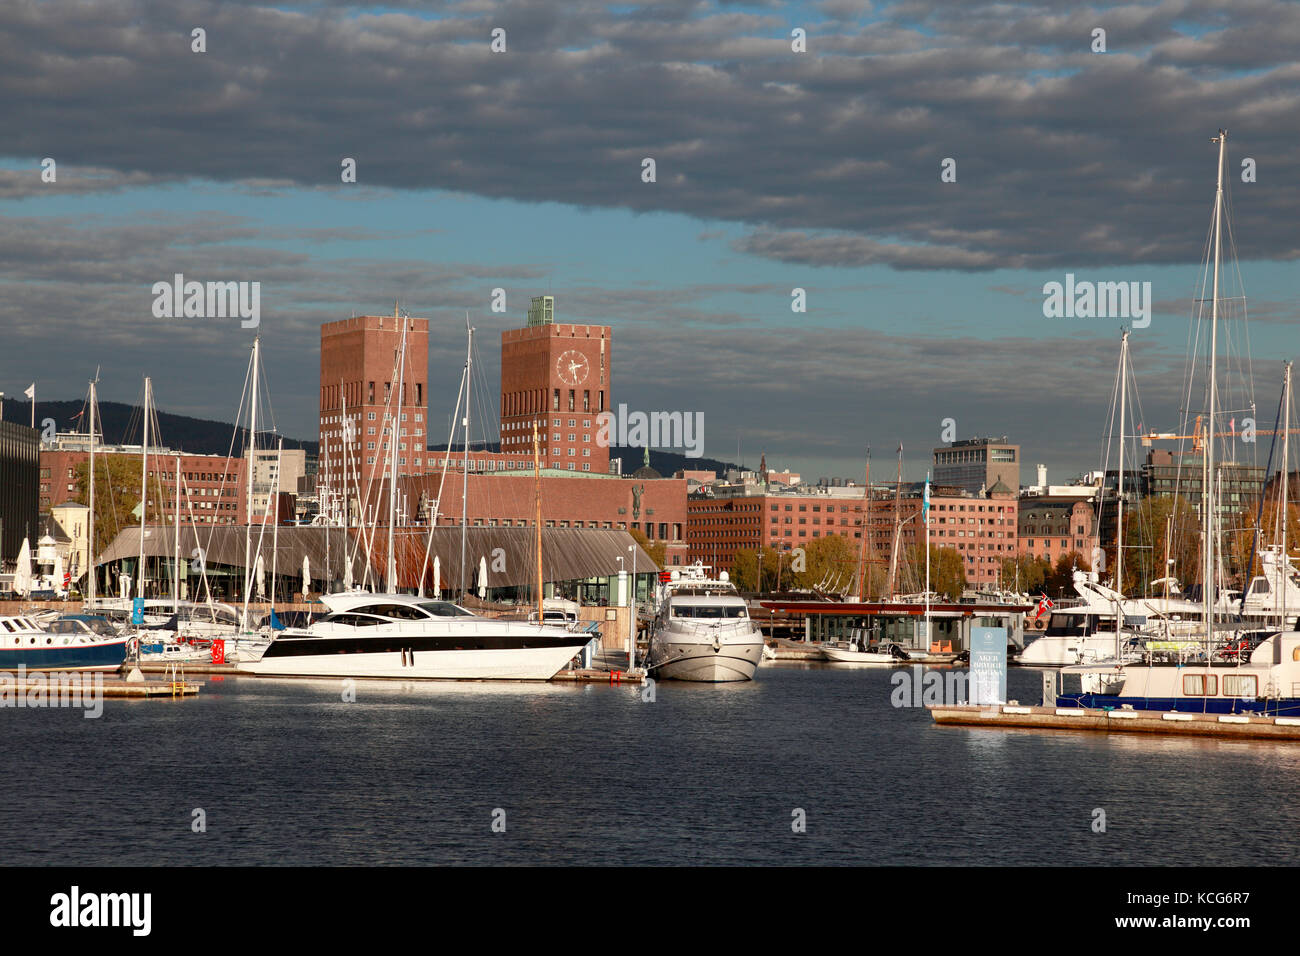 The brick towers of Oslo Town Hall and the waterfront of Aker Brygge Marina in Oslo, Norway Stock Photo